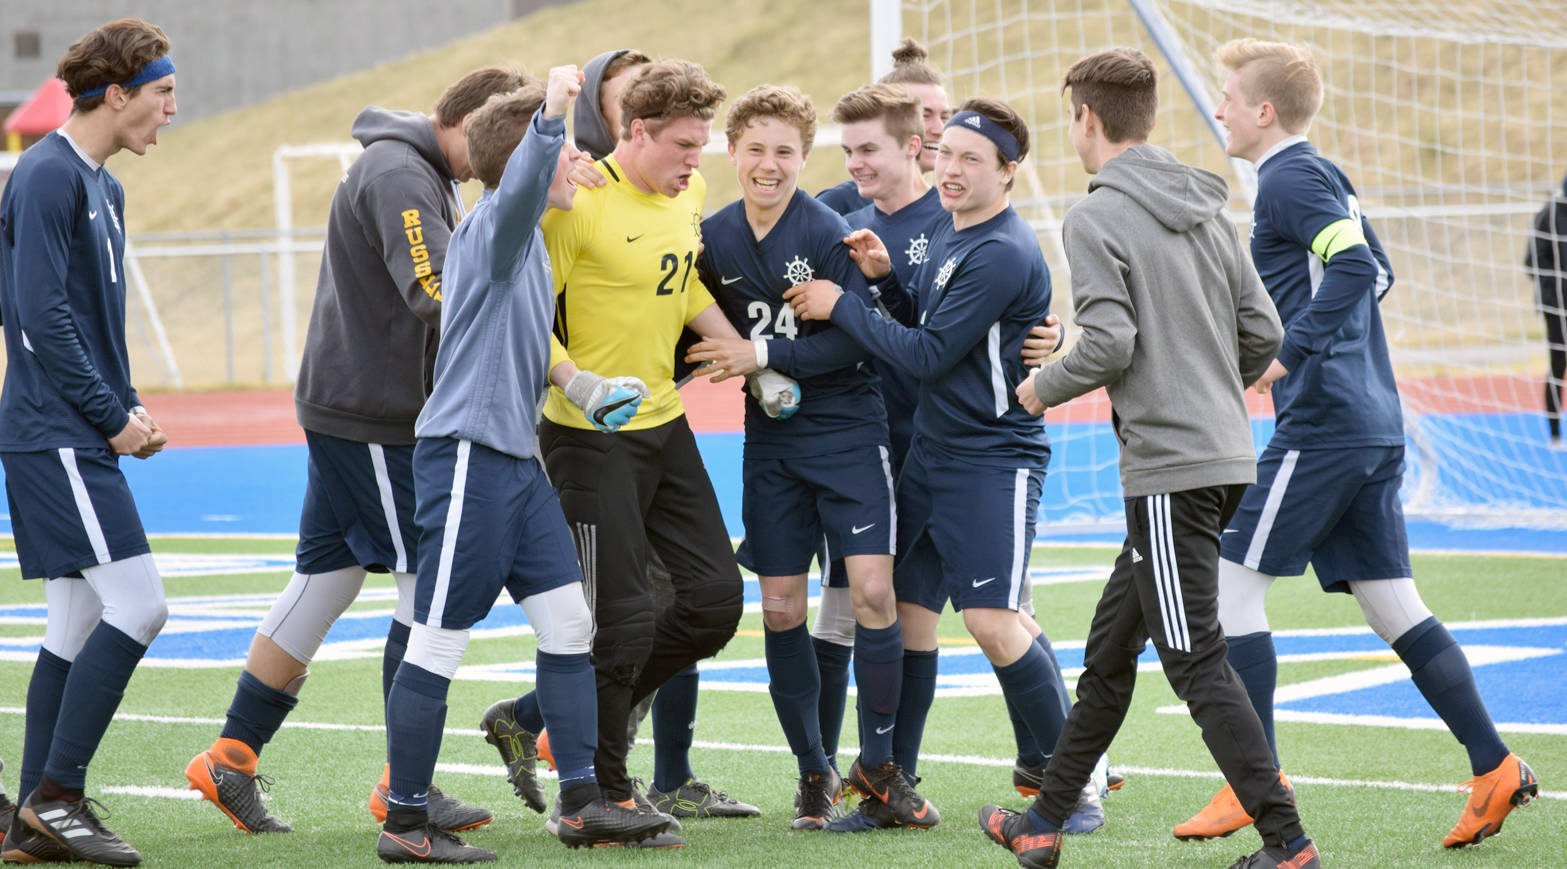 Photo by Jeff Helminiak/Peninsula Clarion Homer goalie Tucker Weston (in yellow) celebrates with teammates after defeating Soldotna in the Peninsula Conference semifinals Friday, May 18 at Soldotna High School.